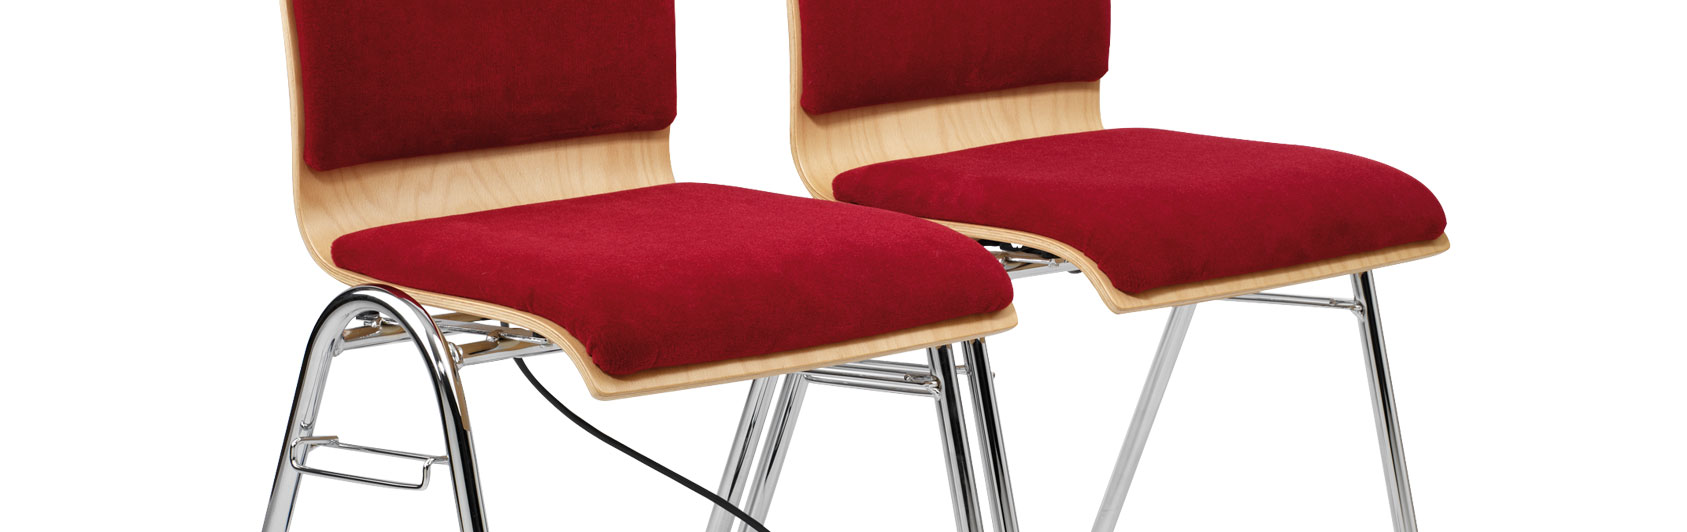 thermo chairs